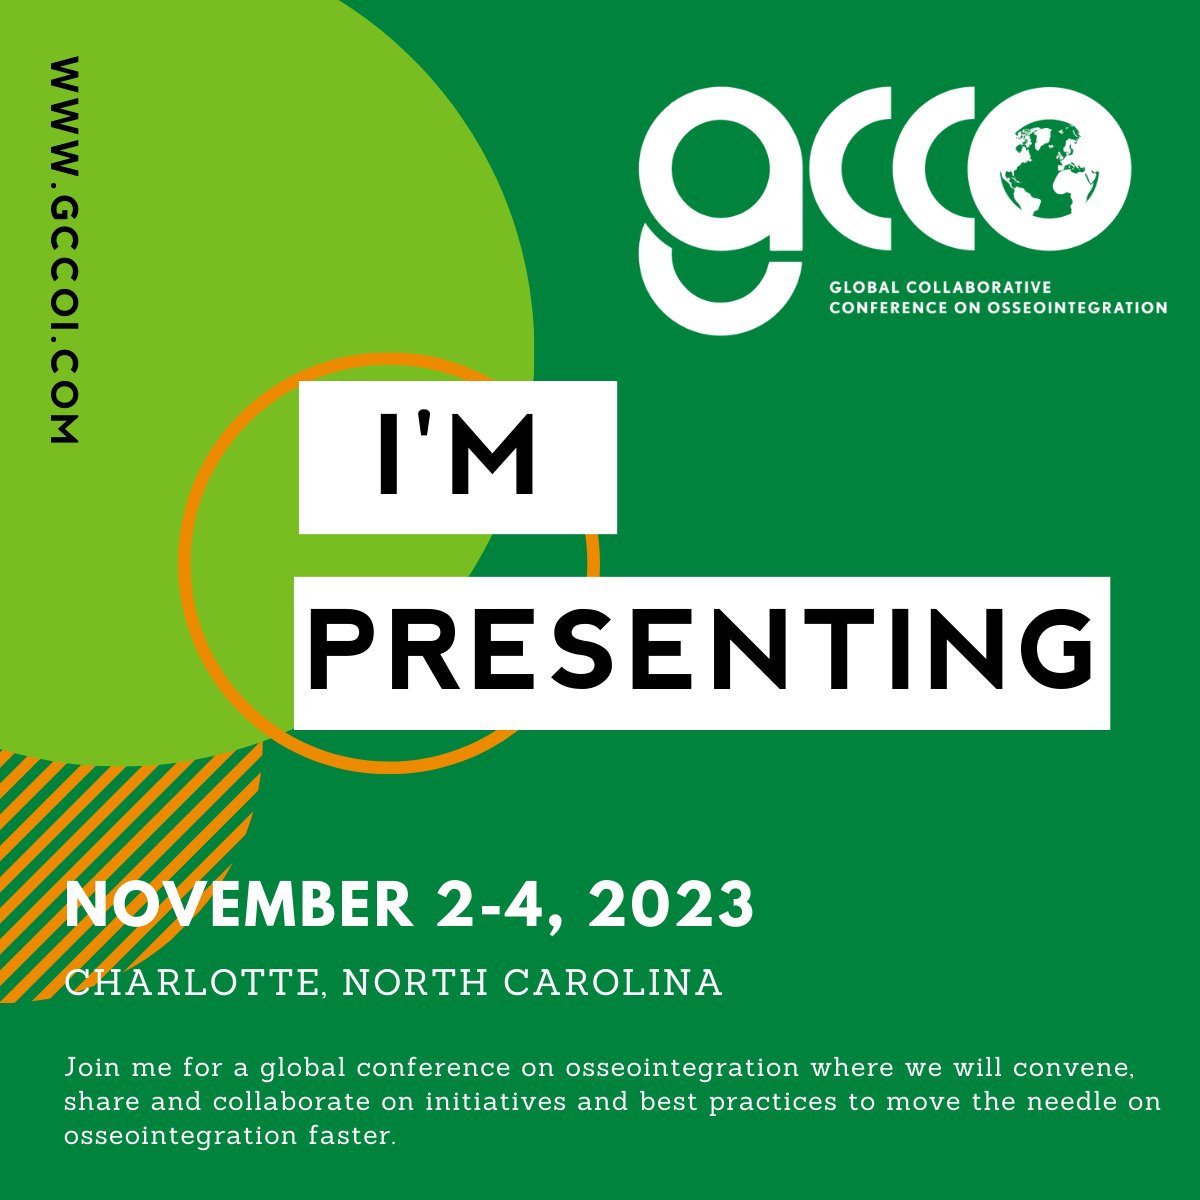 Discover diverse sessions and meet thought leaders shaping the future of #Osseointegration at #GCCO2023. Don't miss out! Register at gccoi.com. #OsseointegrationInnovations #ClinicalAdvancements #OrthopedicResearch #GlobalCollaborativeHealth #CLTConference